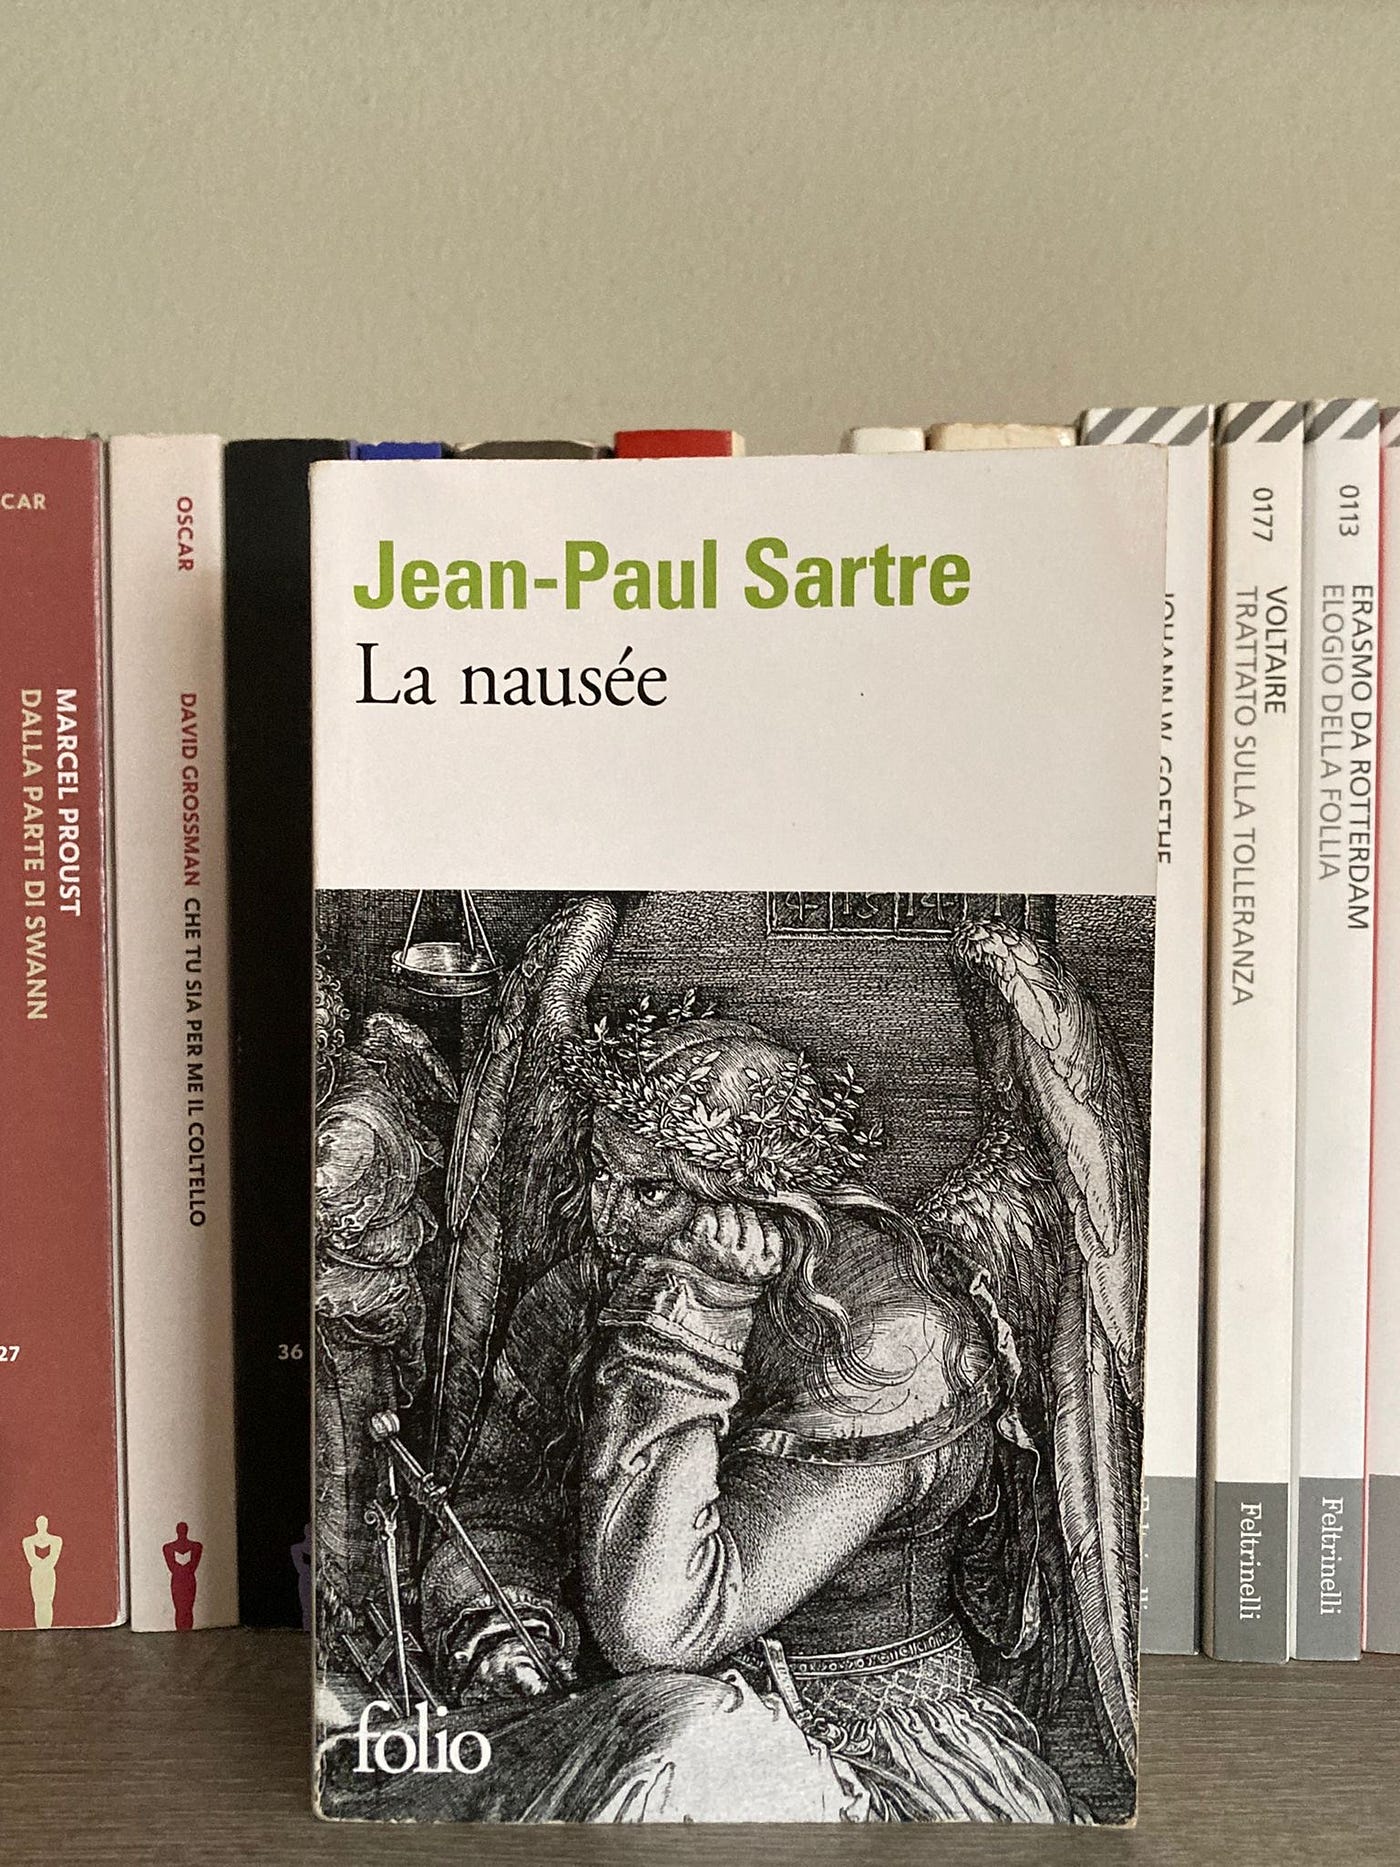 Nausea by Jean-Paul Sartre.. Contrasting opinions, heavy criticism…, by  The Reviewers